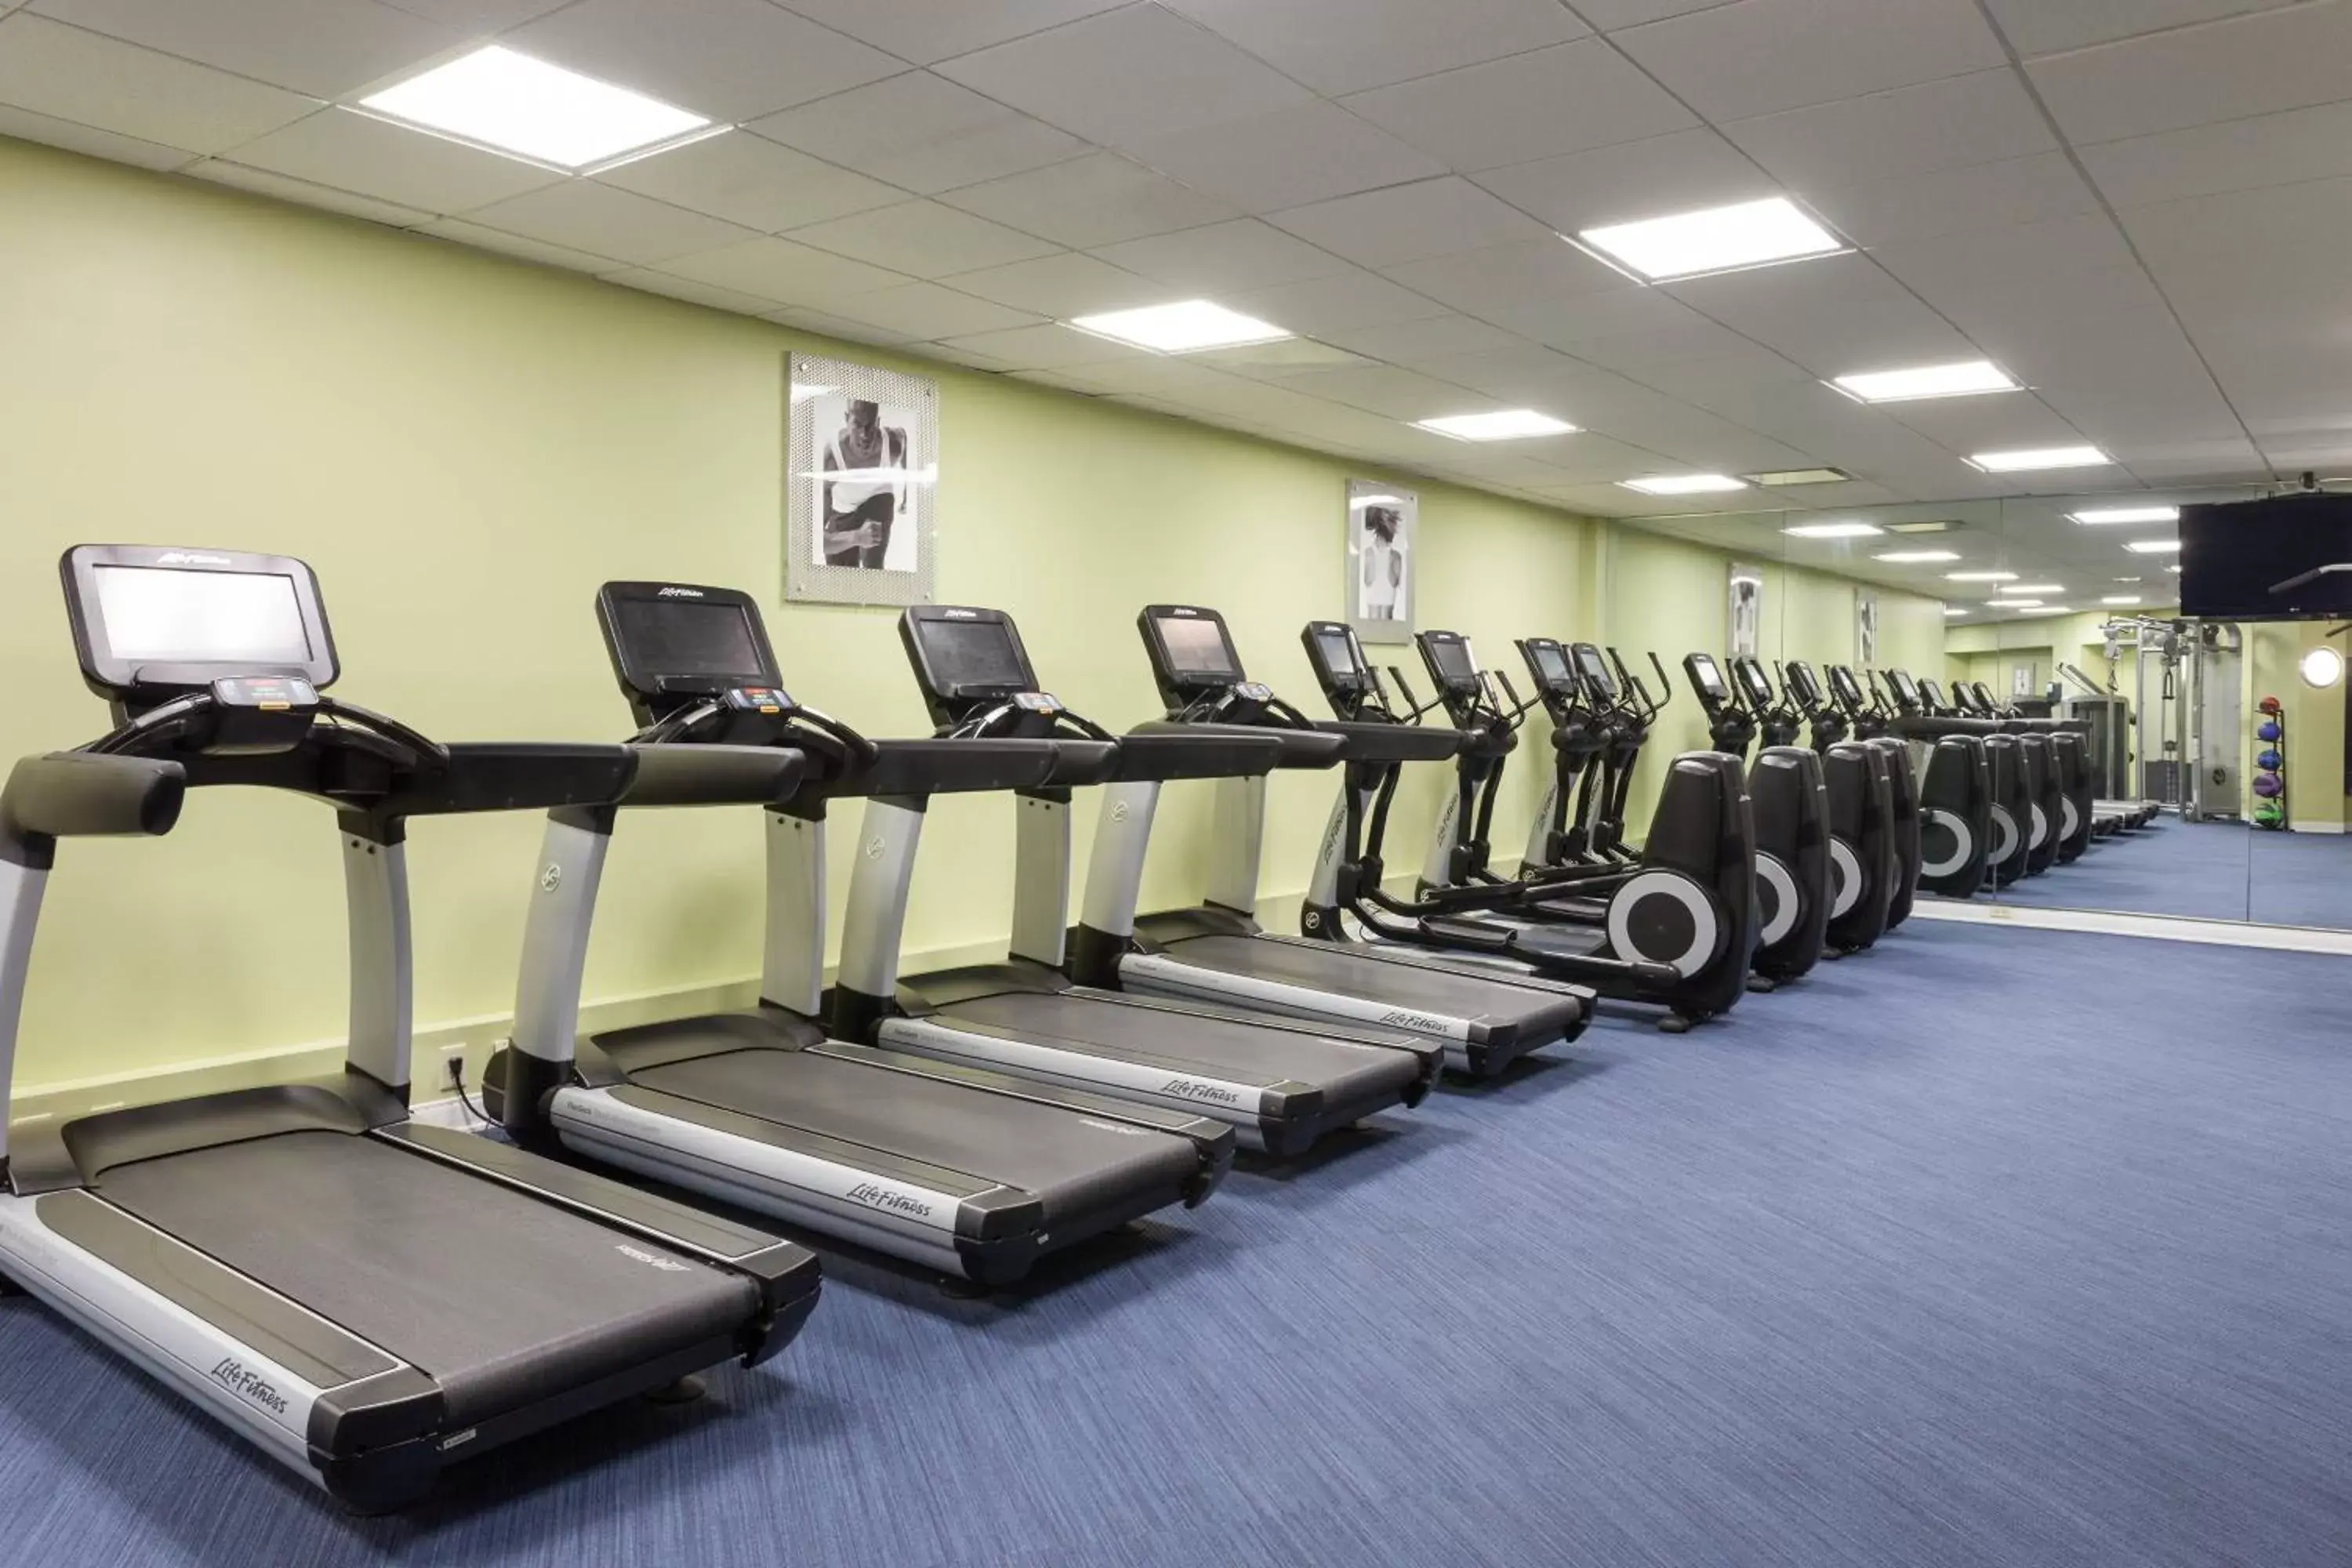 Fitness centre/facilities, Fitness Center/Facilities in West Palm Beach Marriott